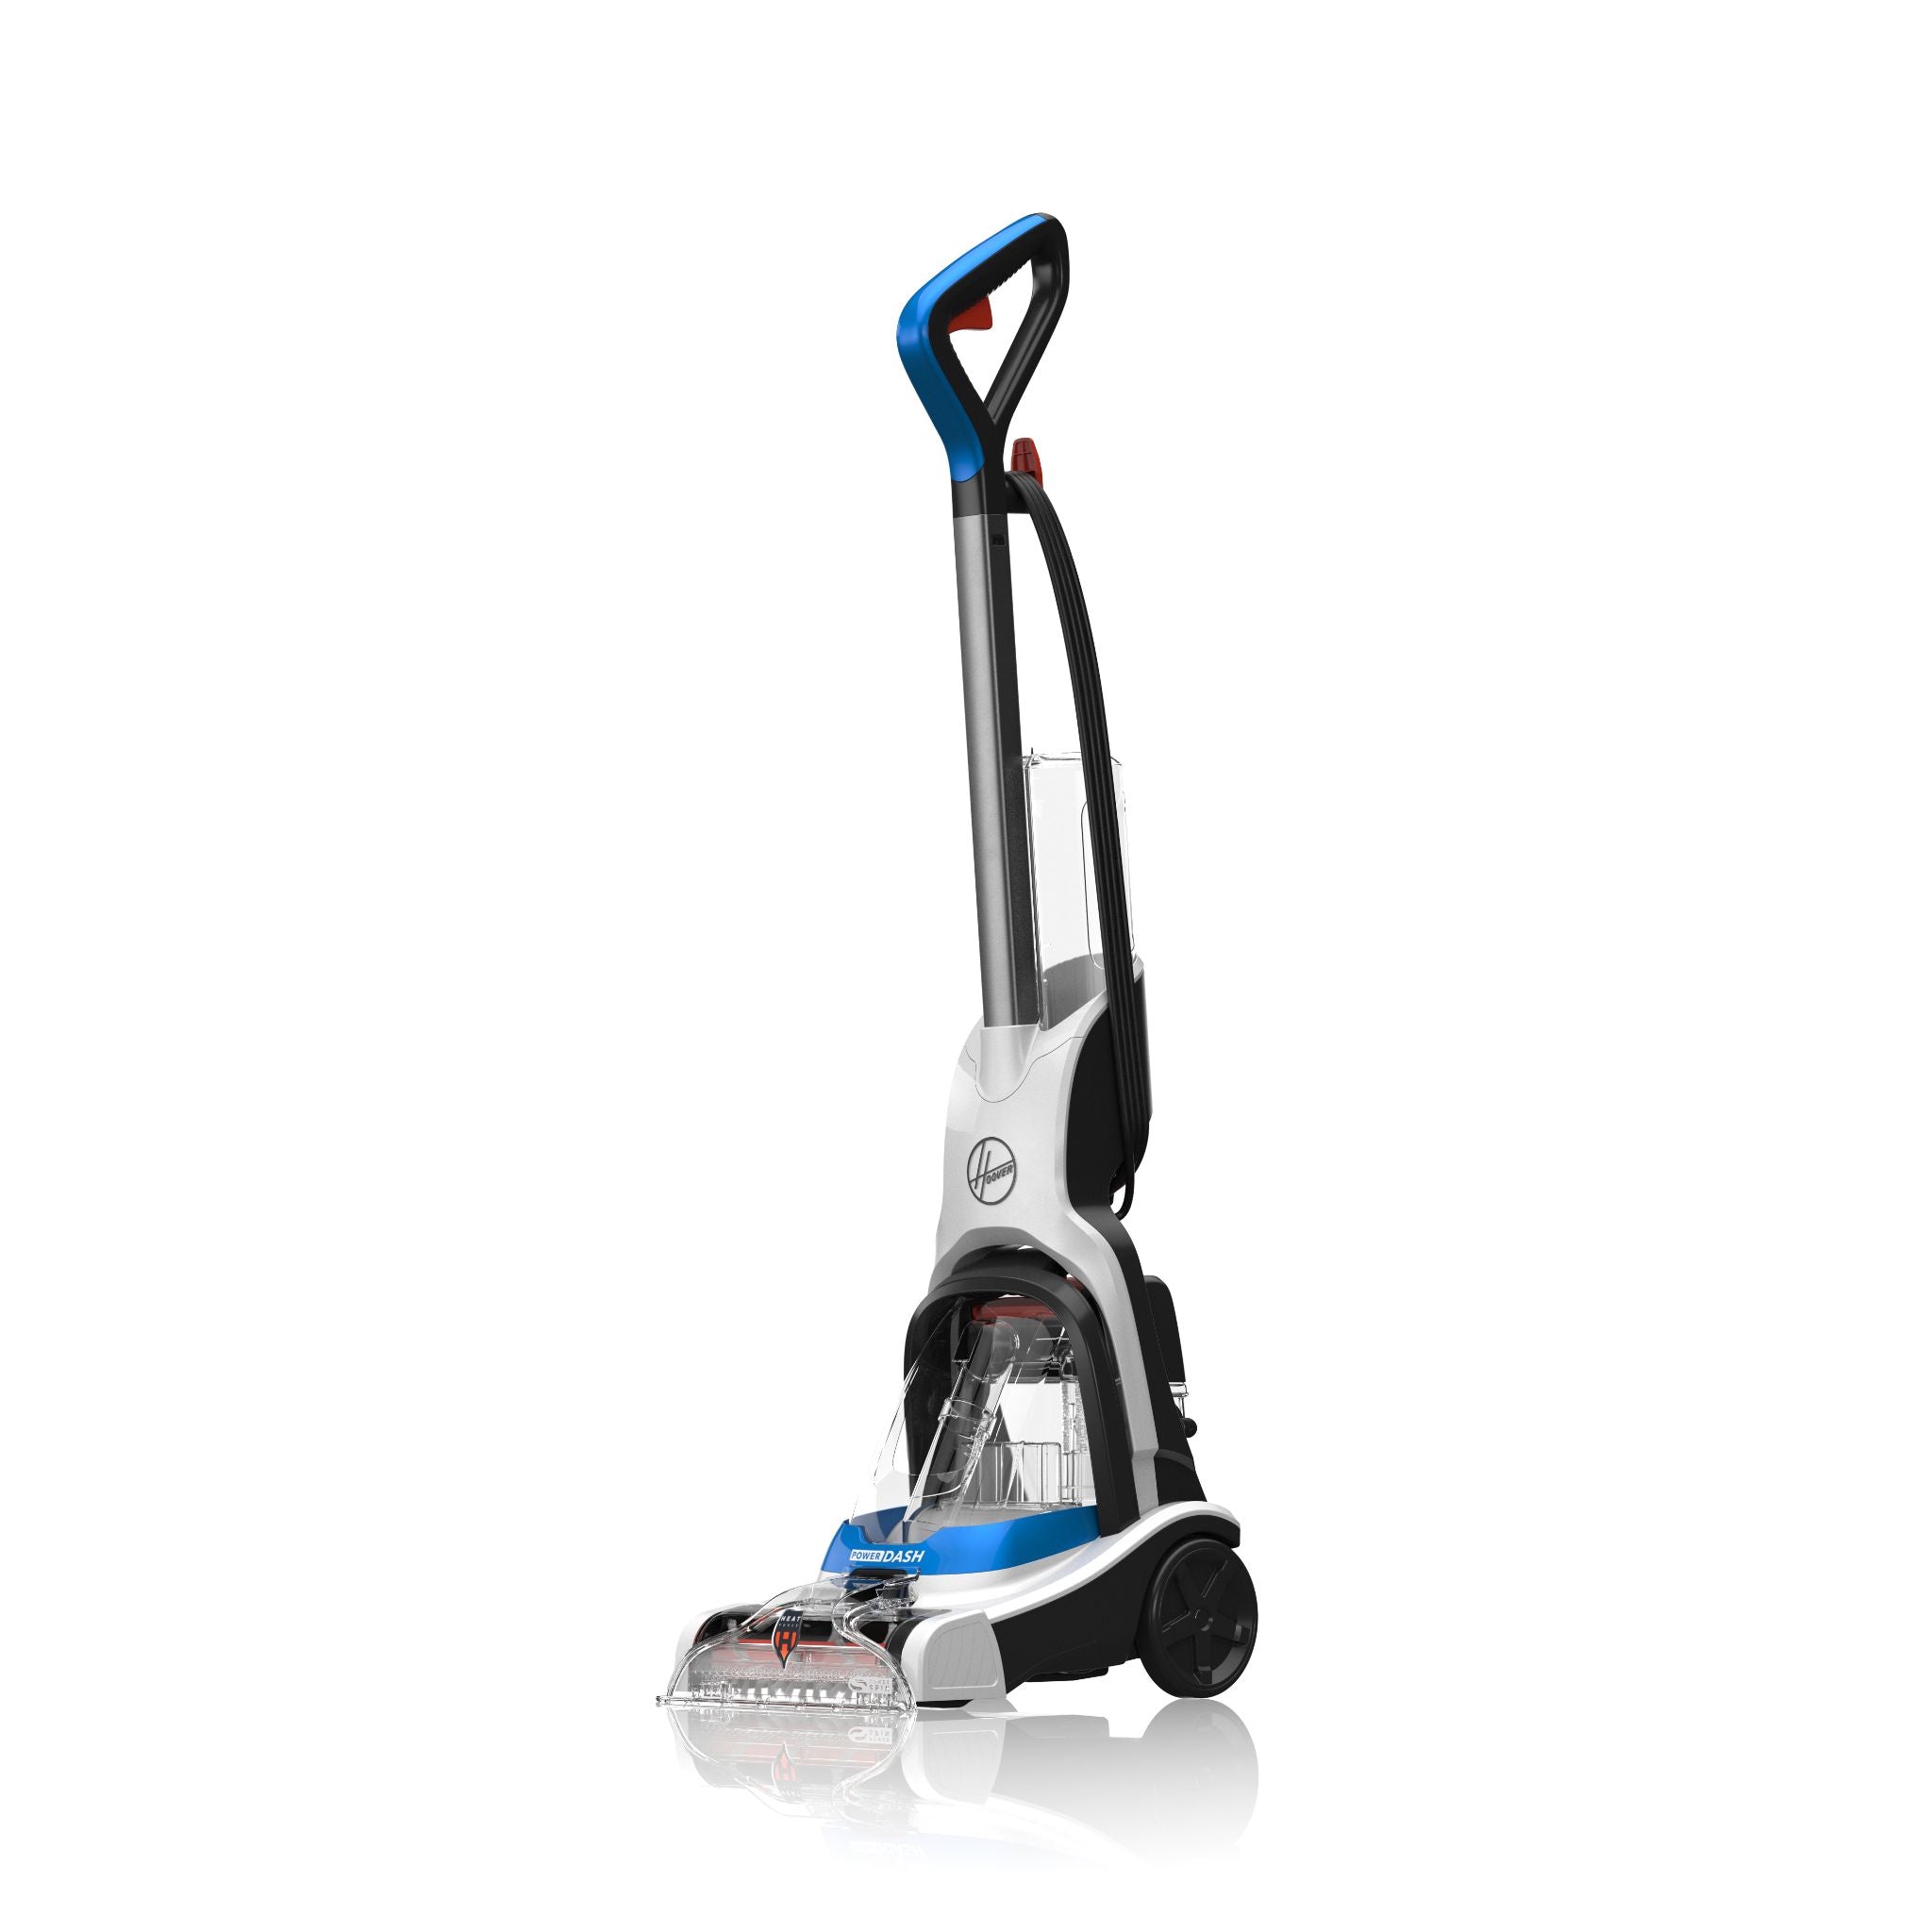 Hoover Power Dash Carpet Cleaner - Corded (FH50700-SAA)